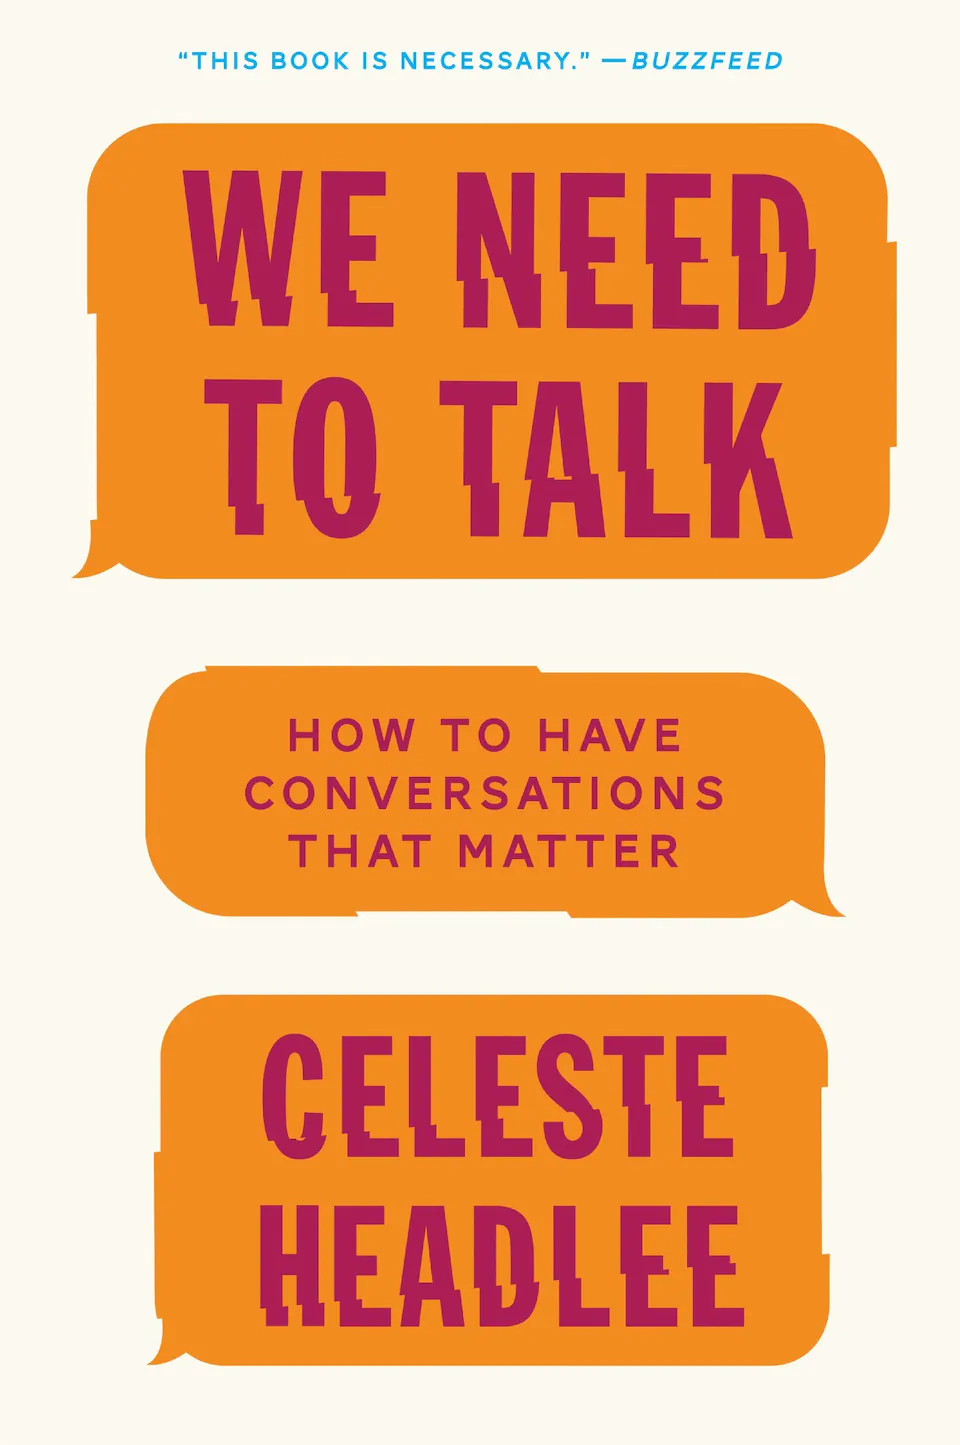 We Need to Talk. How to Have Conversations That Matter by Celeste Headle